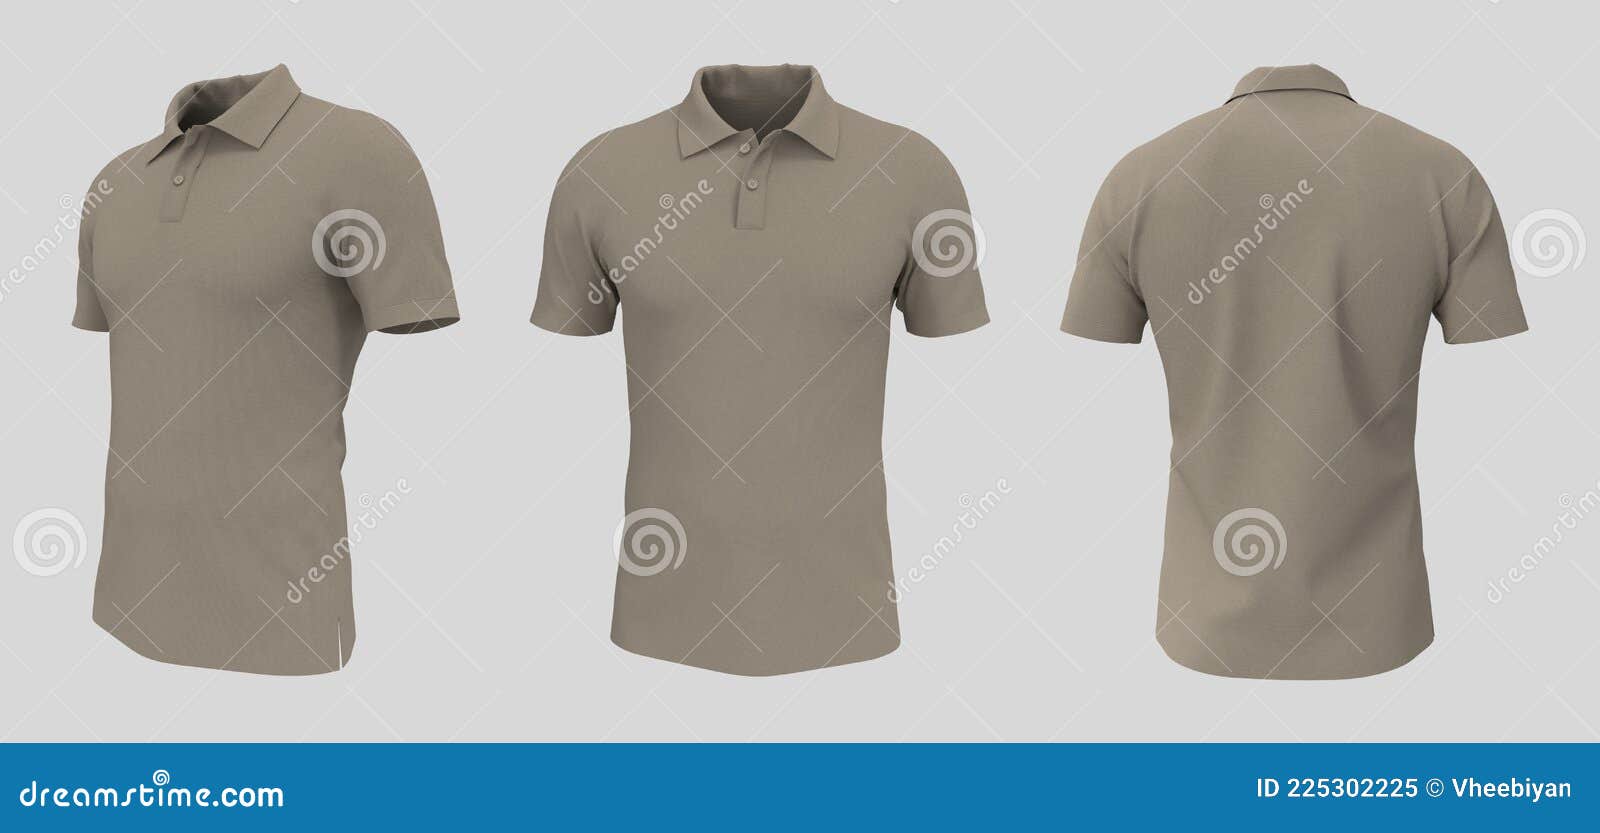 Blank Collared Shirt Mockup in Front, Side and Back Views Stock ...